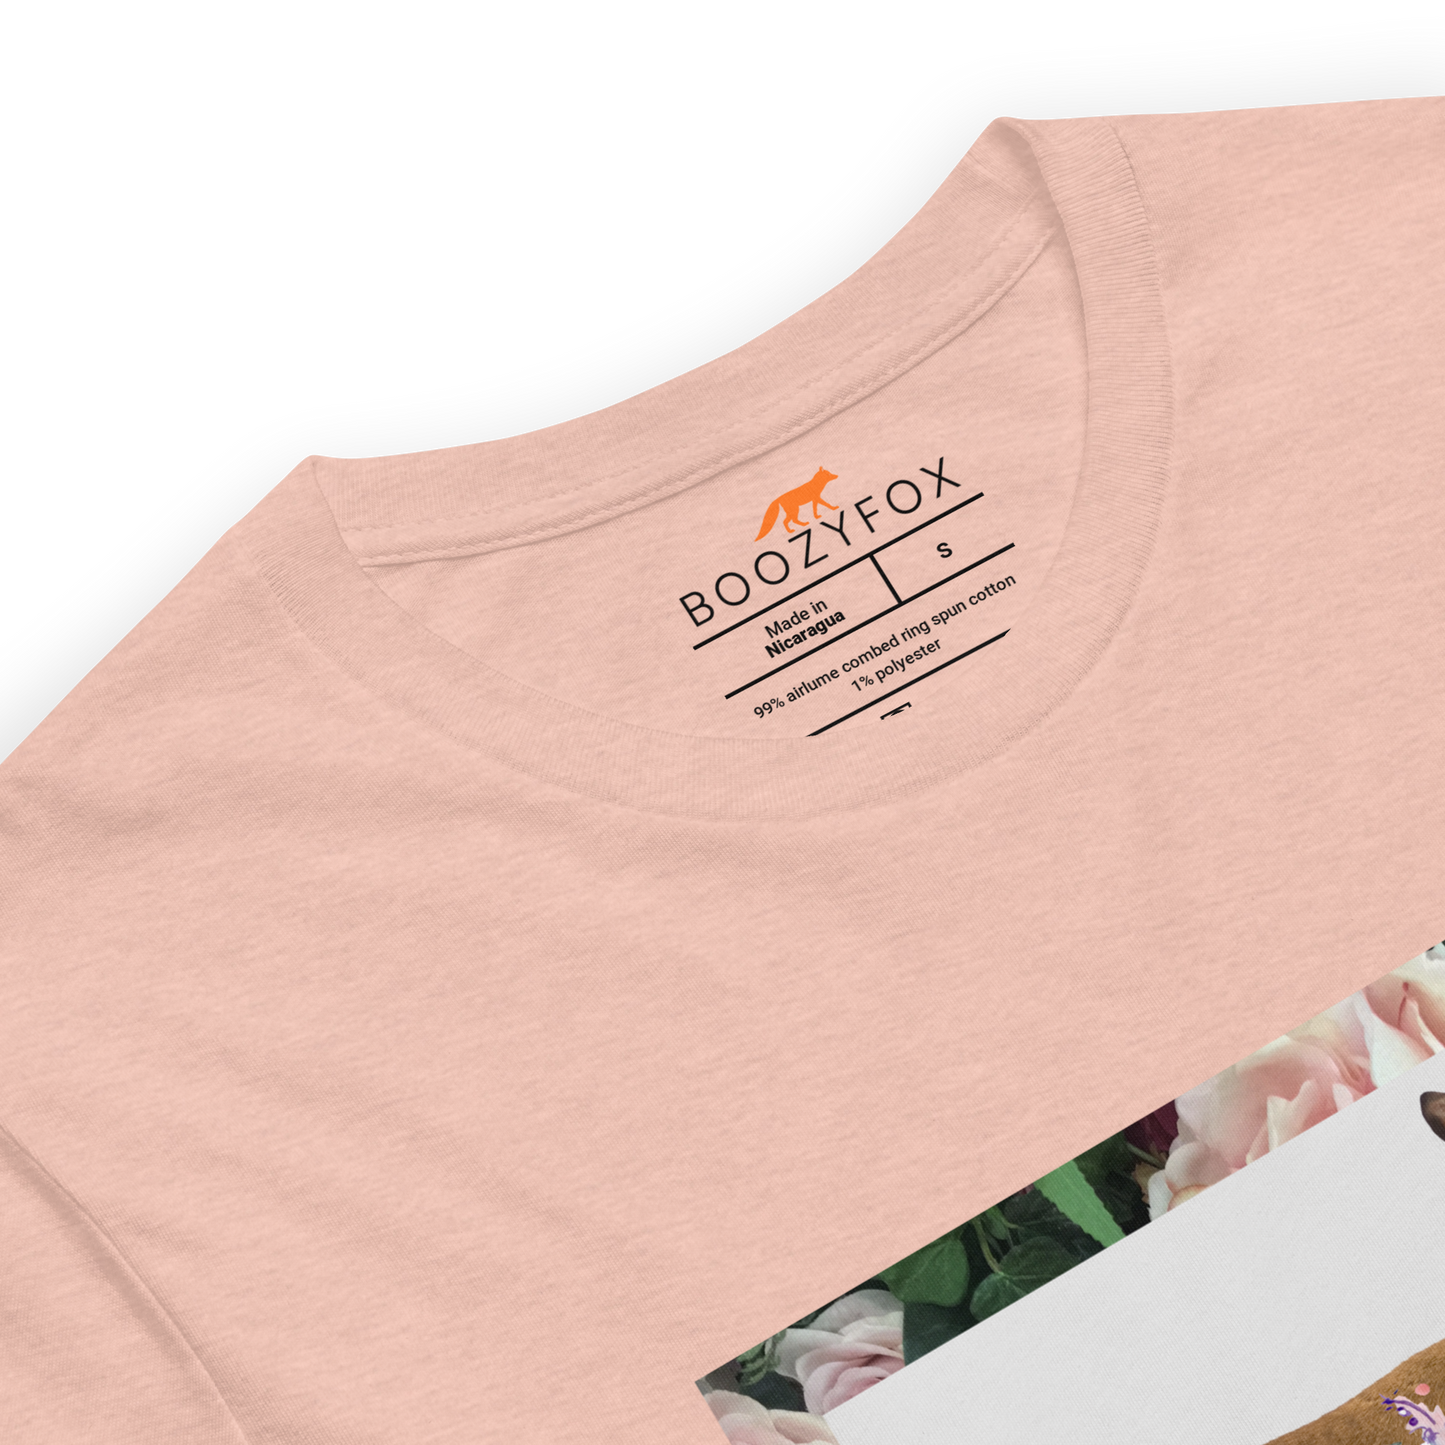 Product Details of a Heather Prism Peach Premium Deer T-Shirt featuring a stunning Floral Deer graphic on the chest - Cute Graphic Deer Tees - Boozy Fox